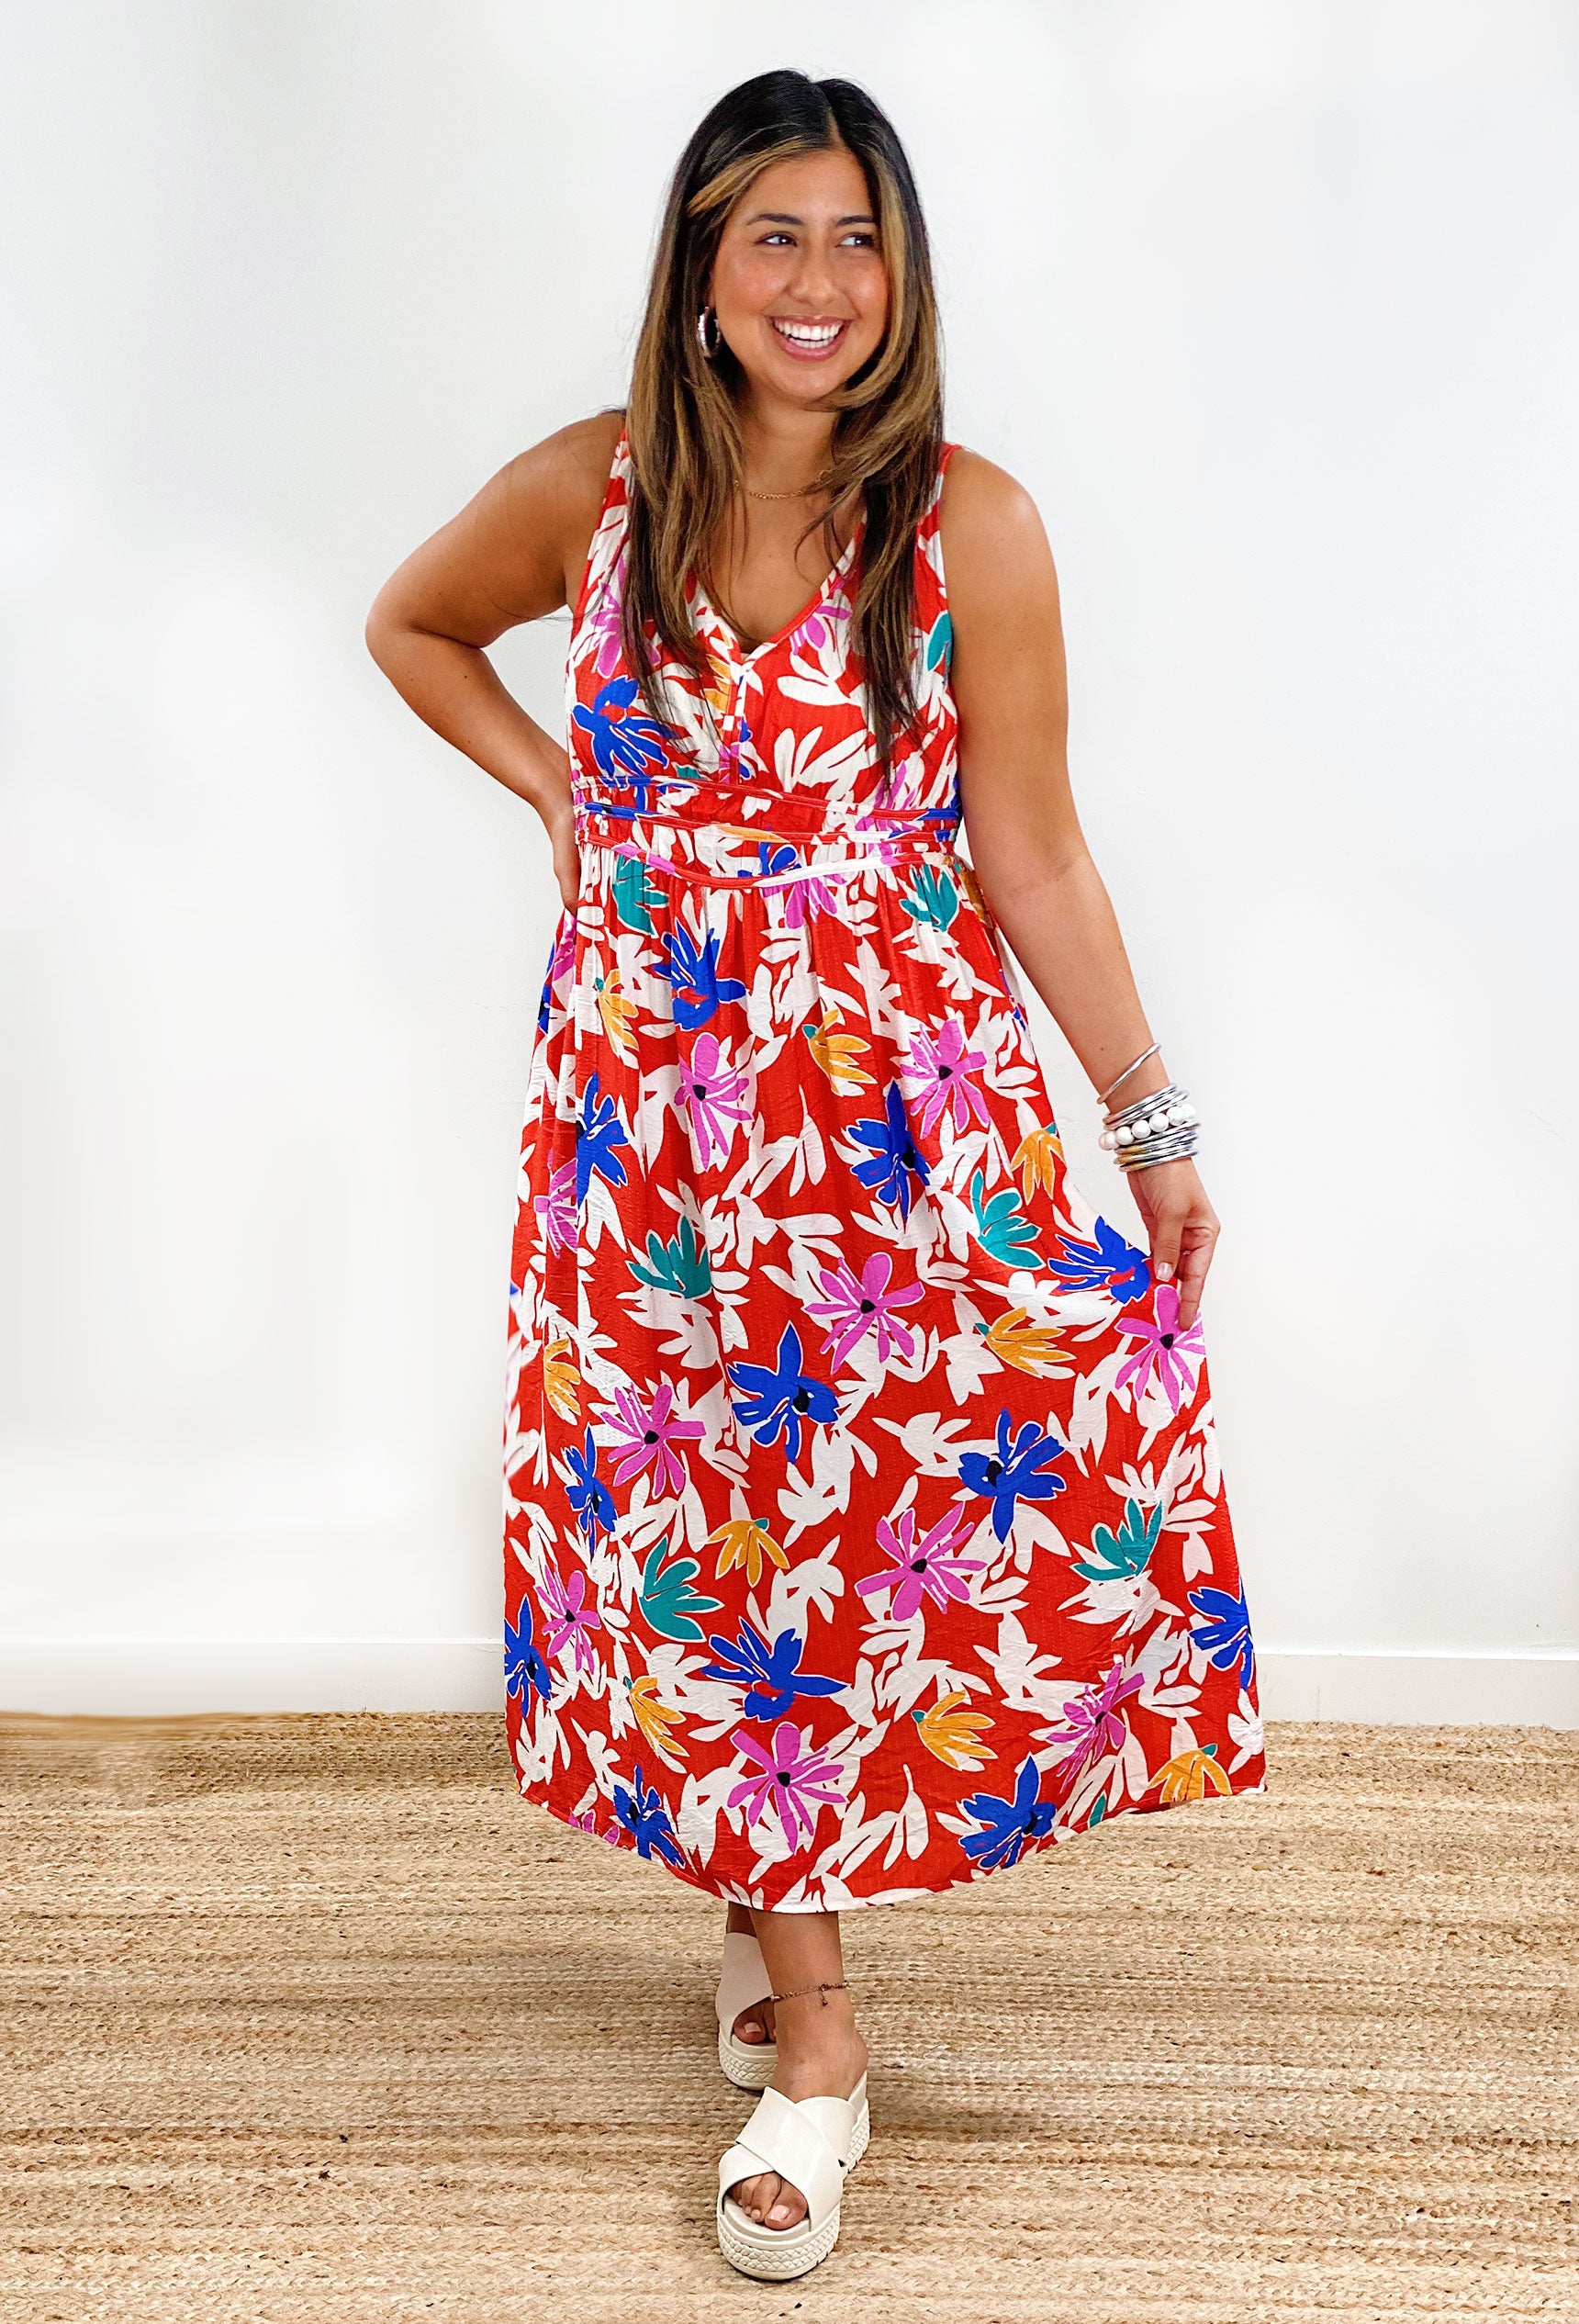 Island bloom midi dress. Red dress featuring a floral print with pops of color and a v-neck line.